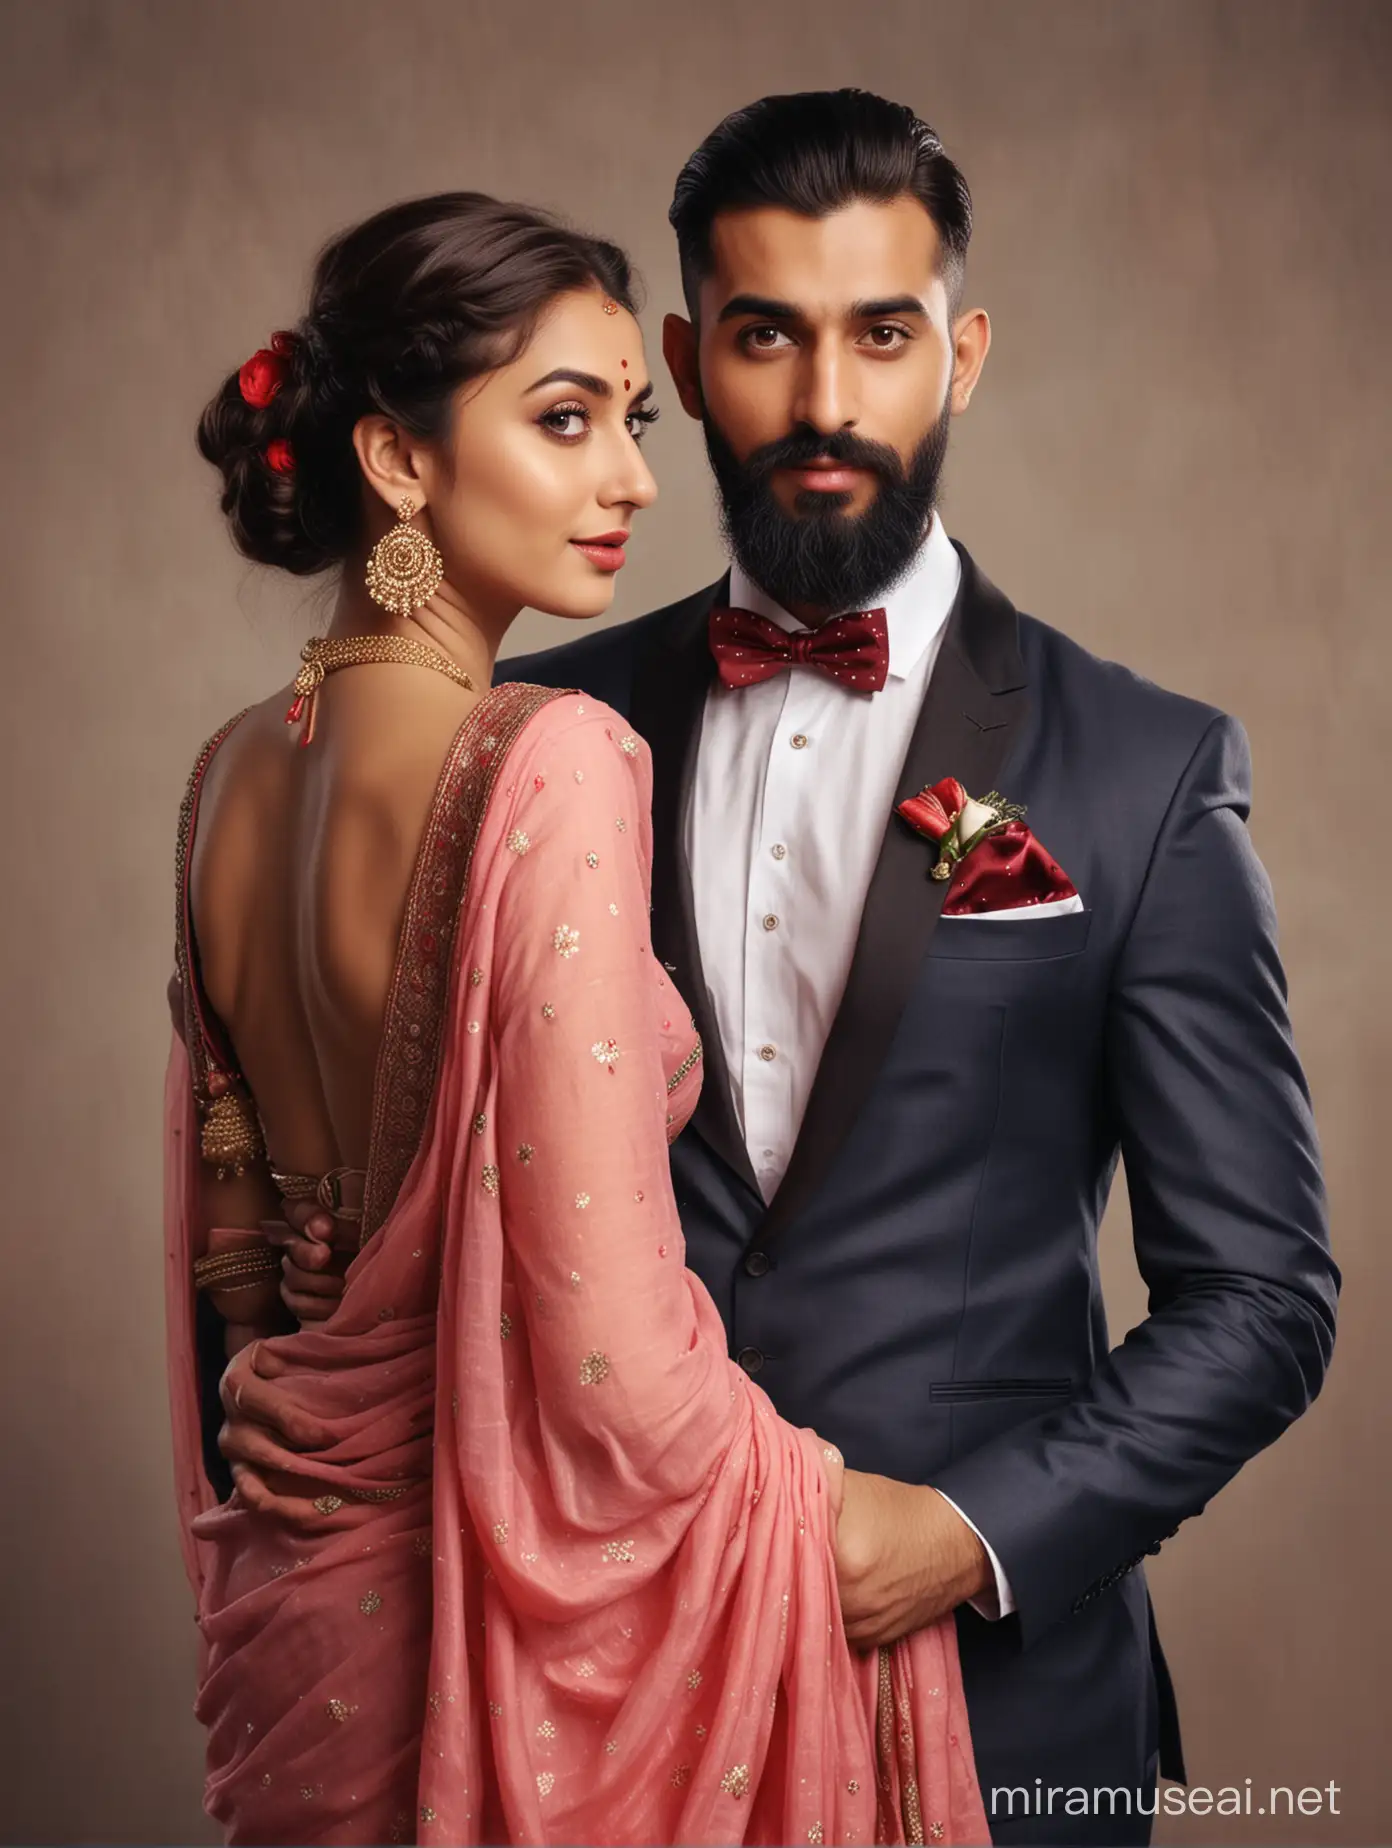 full portrait photo of most beautiful european couple as most beautiful indian couple, most beautiful girl in saree,  low cut back with big knot, red dot,  full makeup, embracing man from back side, girl holding man from back, girl holding man from back with emotional attachment and ecstasy, man with stylish beard and in formals and tie, photo realistic, 4k.